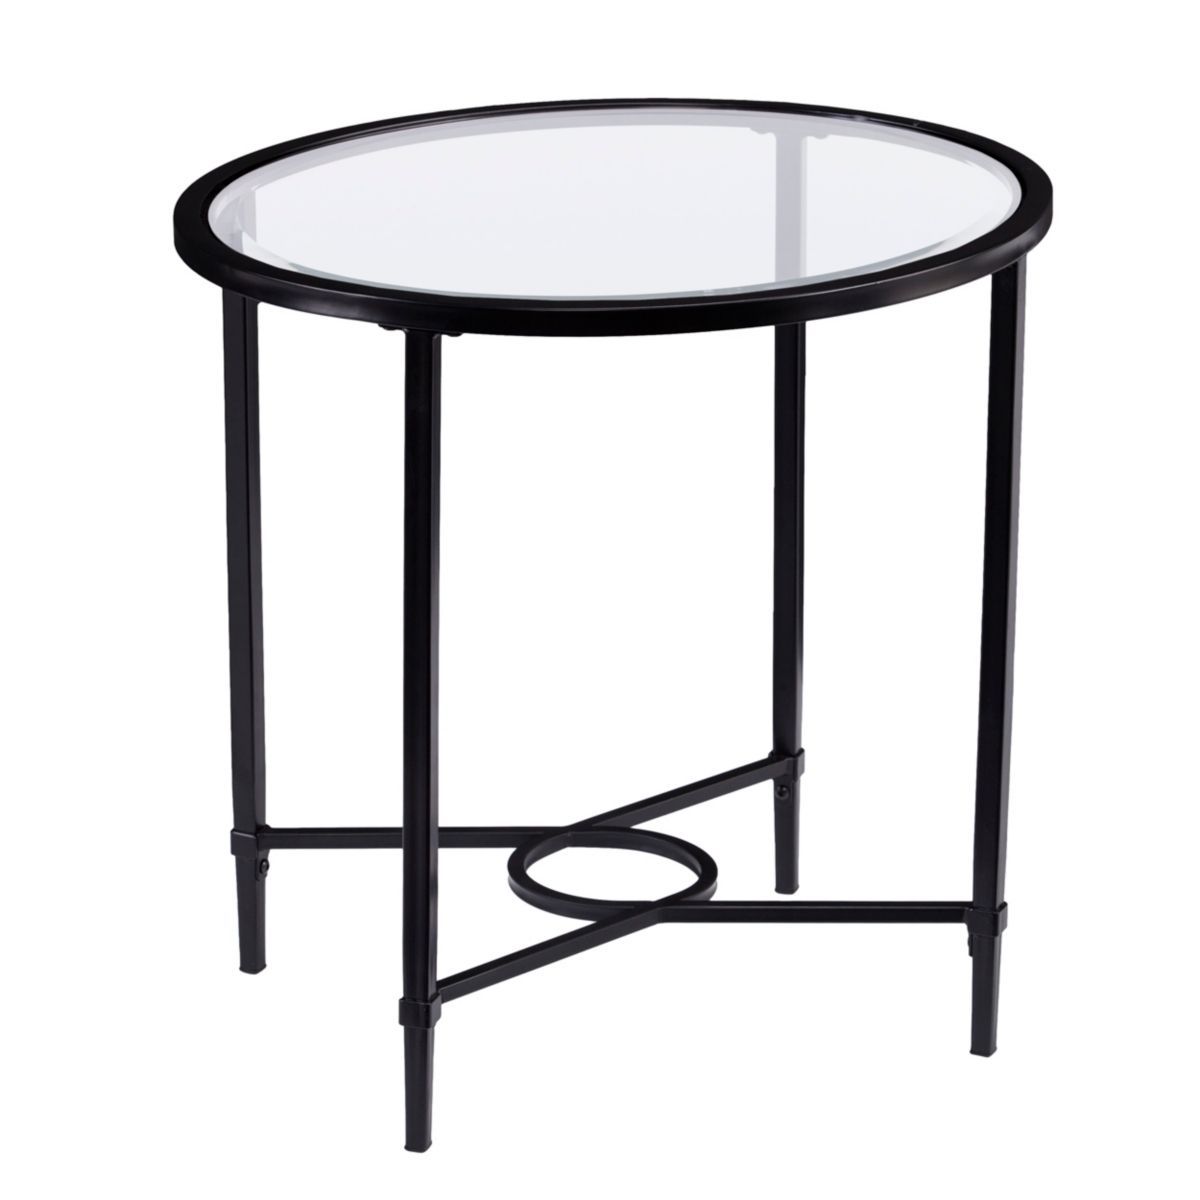 Southern Enterprises Carabella Metal And Glass Oval Side Table Throughout Tempered Glass Oval Side Tables (Gallery 18 of 20)